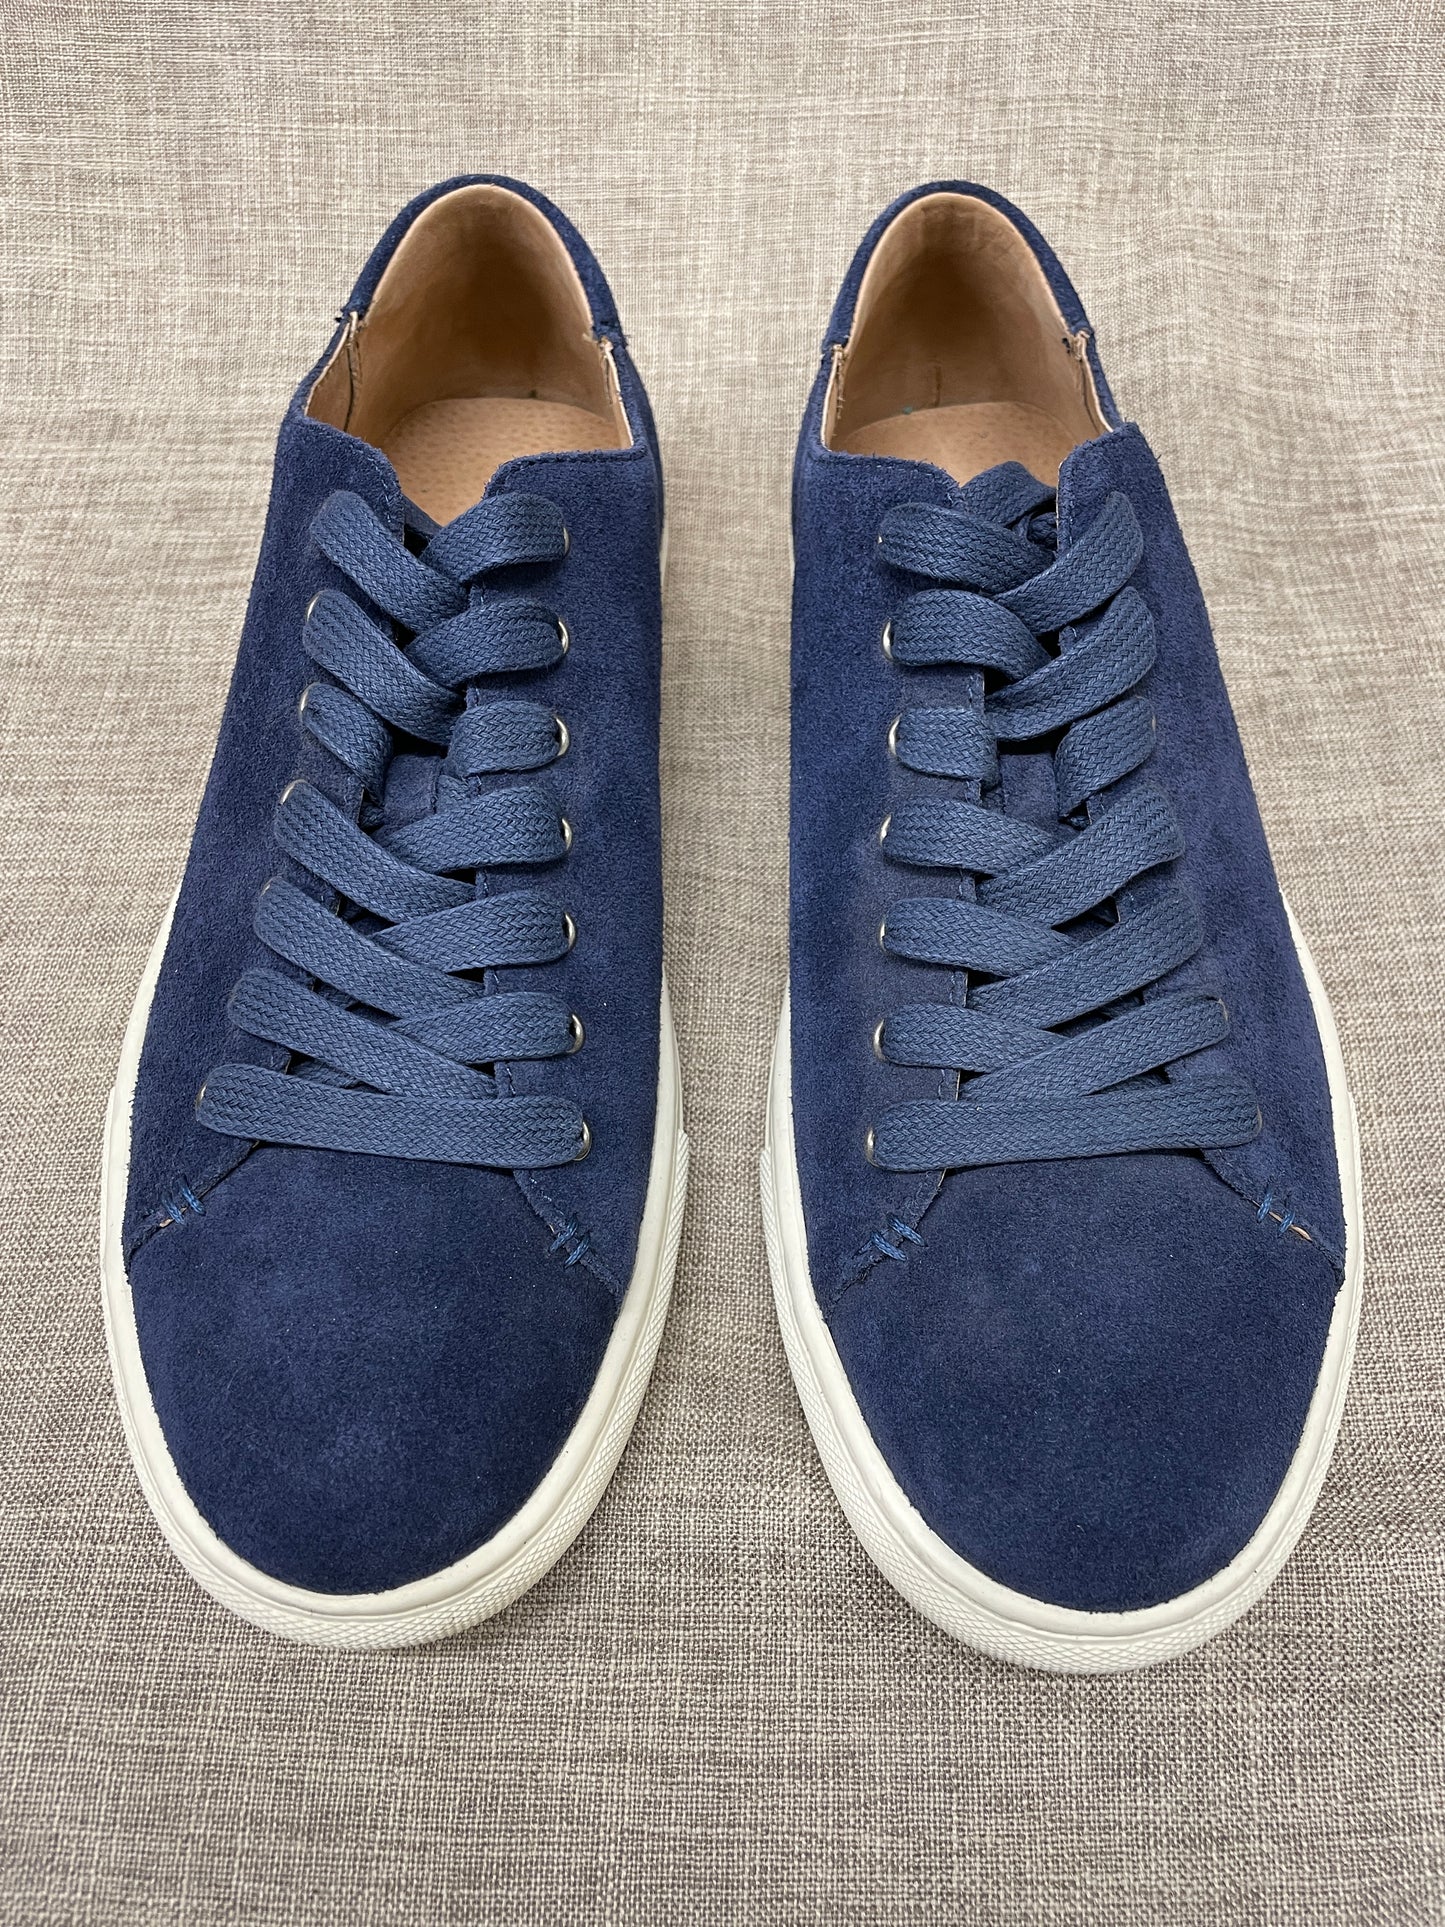 New Polo by Ralph Lauren Navy Blue Suede Leather Trainers Size 10